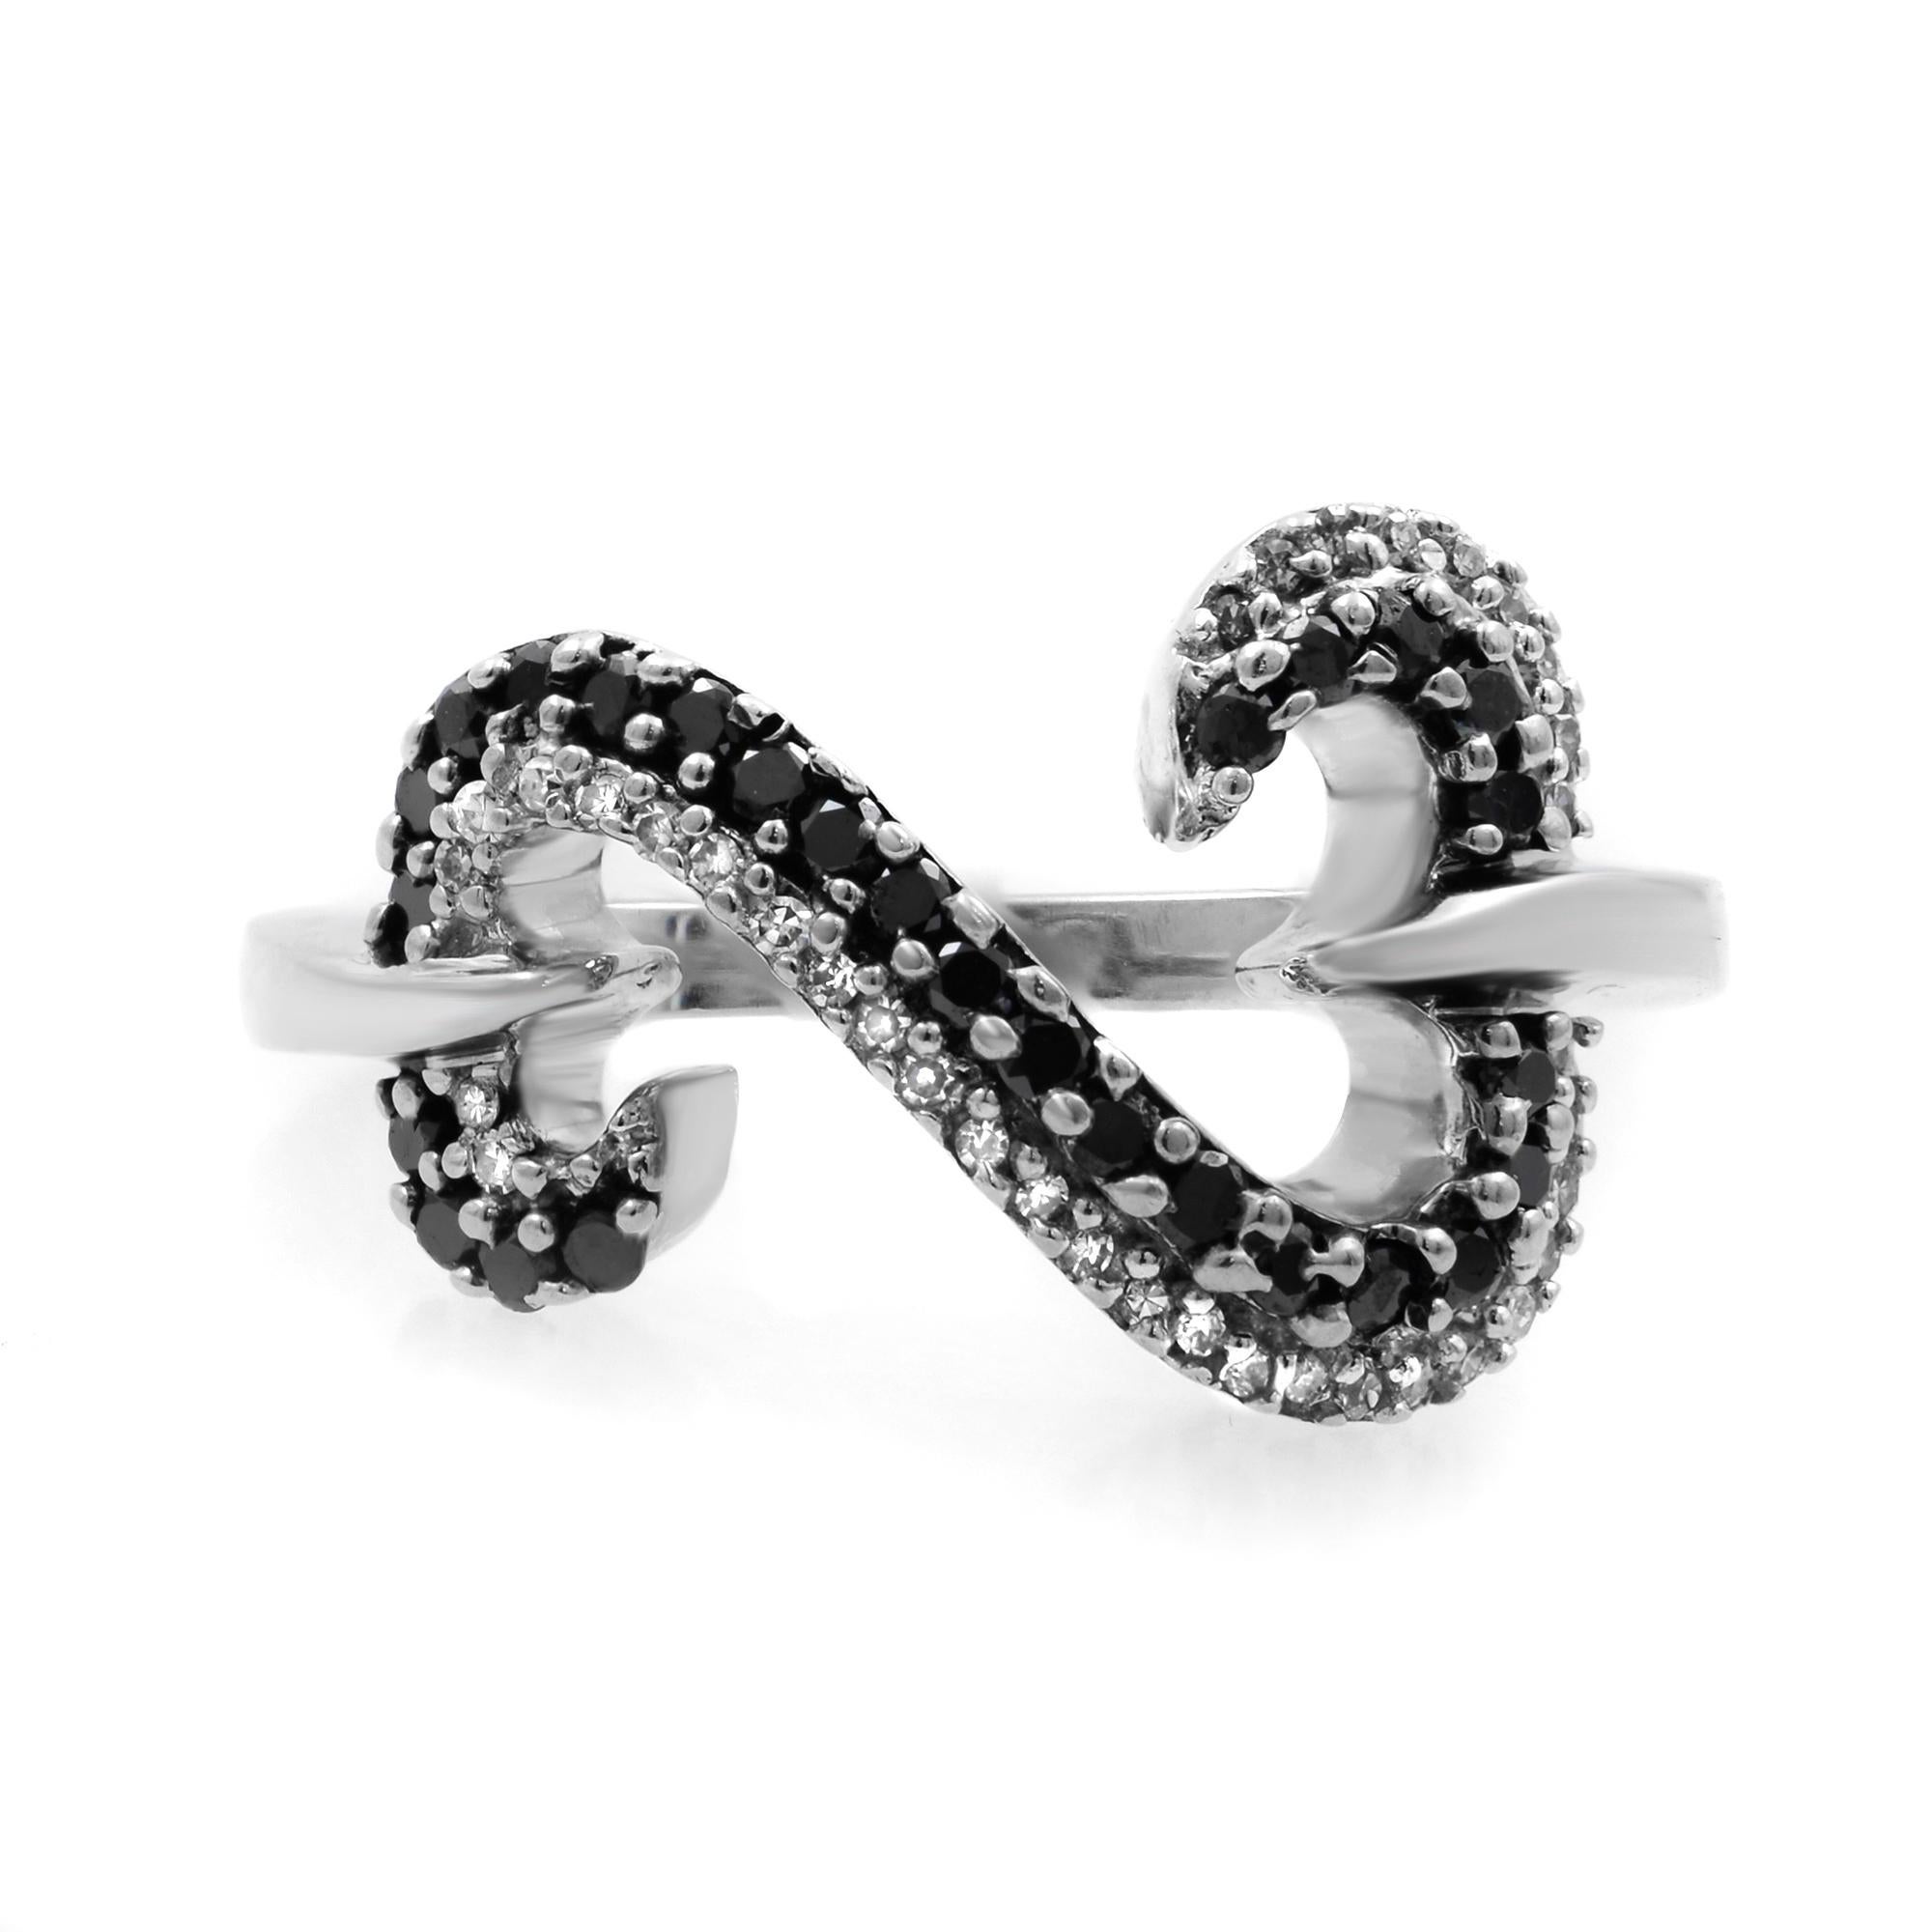 This stylish ring features prong set white and black diamonds encrusted in an open heart shaped mounting. Crafted in 14k white gold. Total diamond weight: 0.50 carat. Ring size: 6.75. Total weight: 4.79. Great pre-owned condition. Comes with a